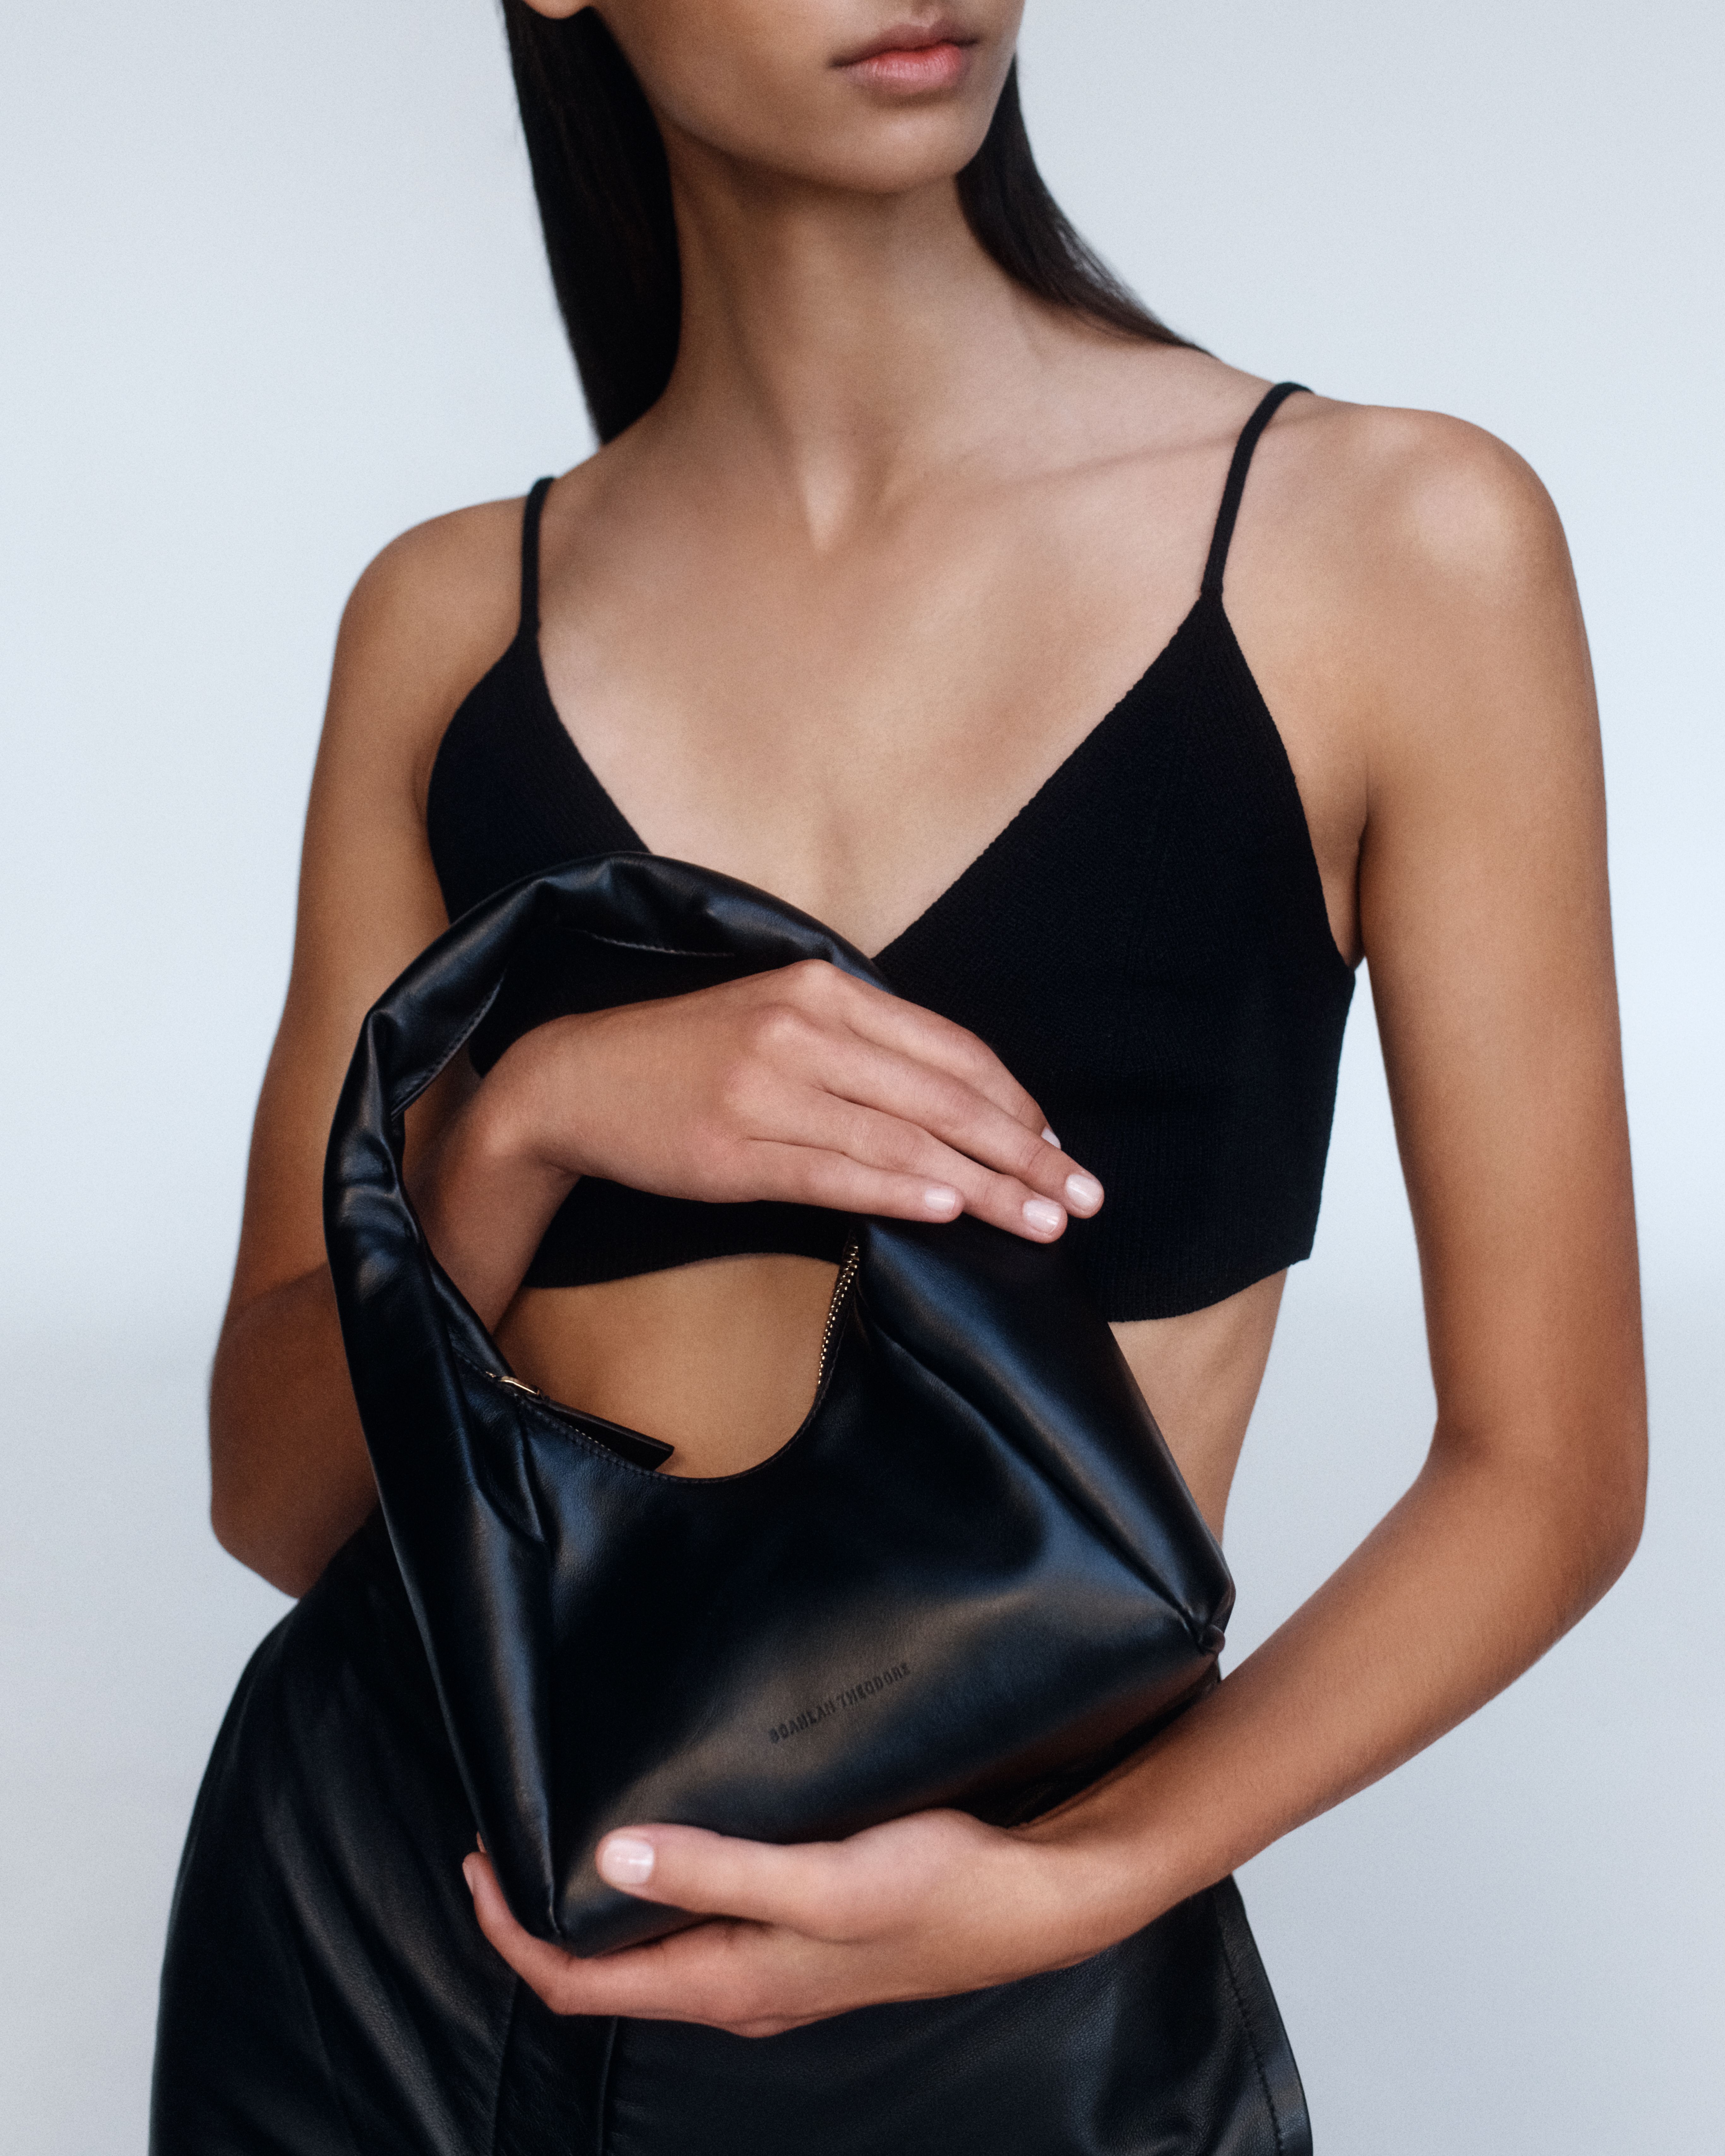 Model holding a small black leather bag wearing a black cropped singlet and leather skirt